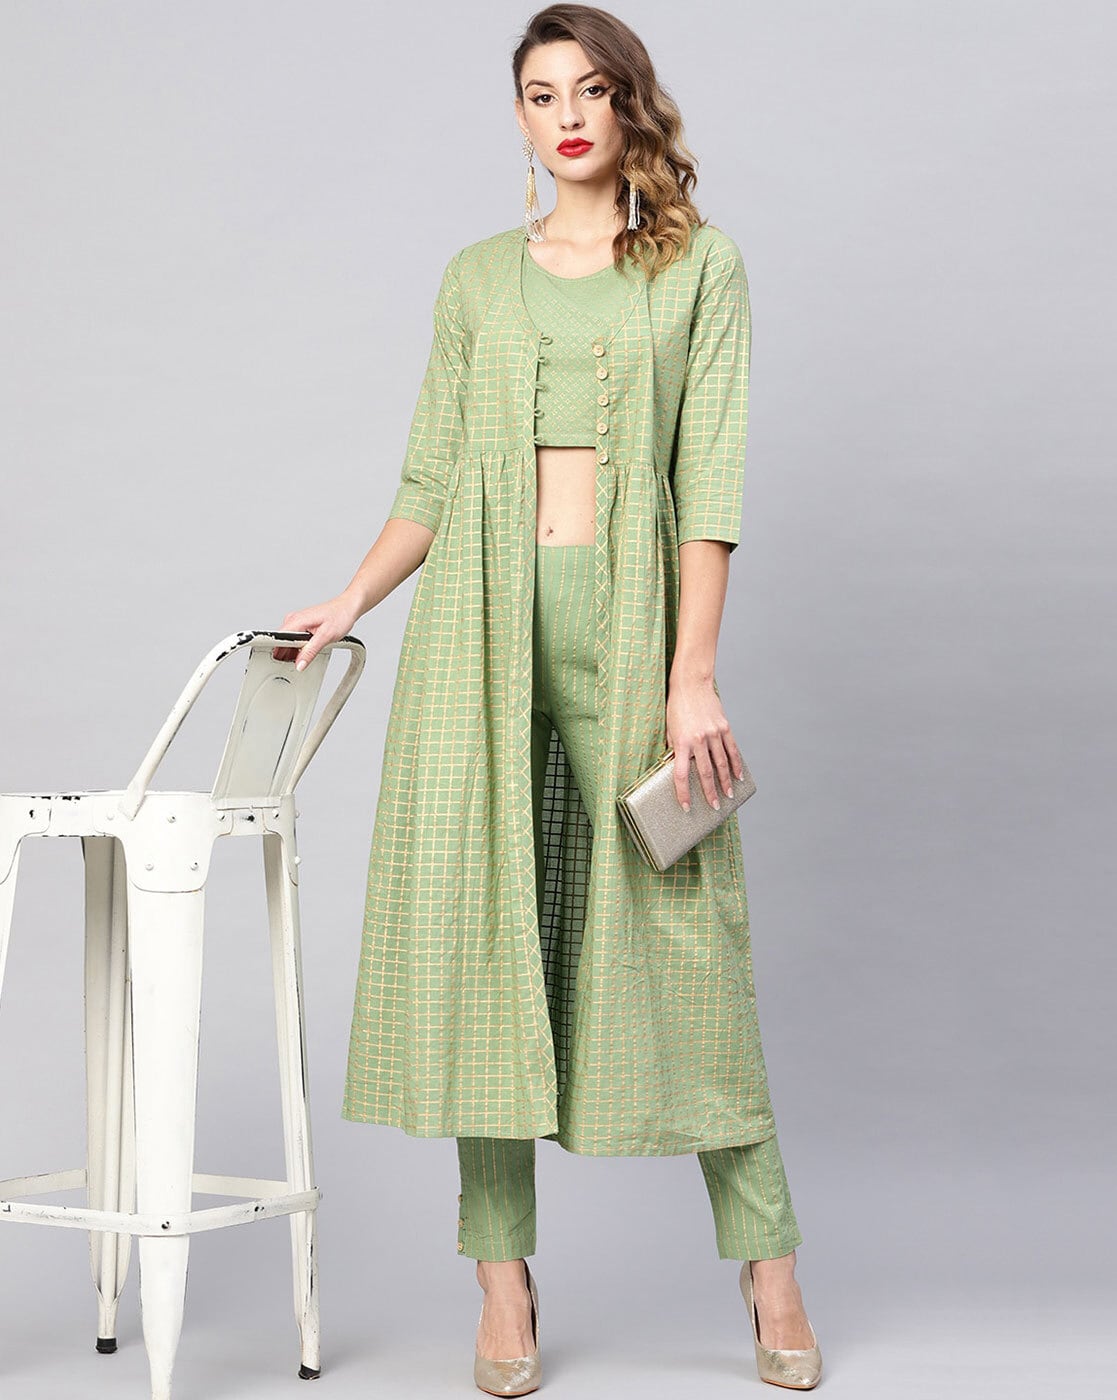 Indian Cotton Wear - Buy Ethnic Cotton Clothing For Women in India - Indya